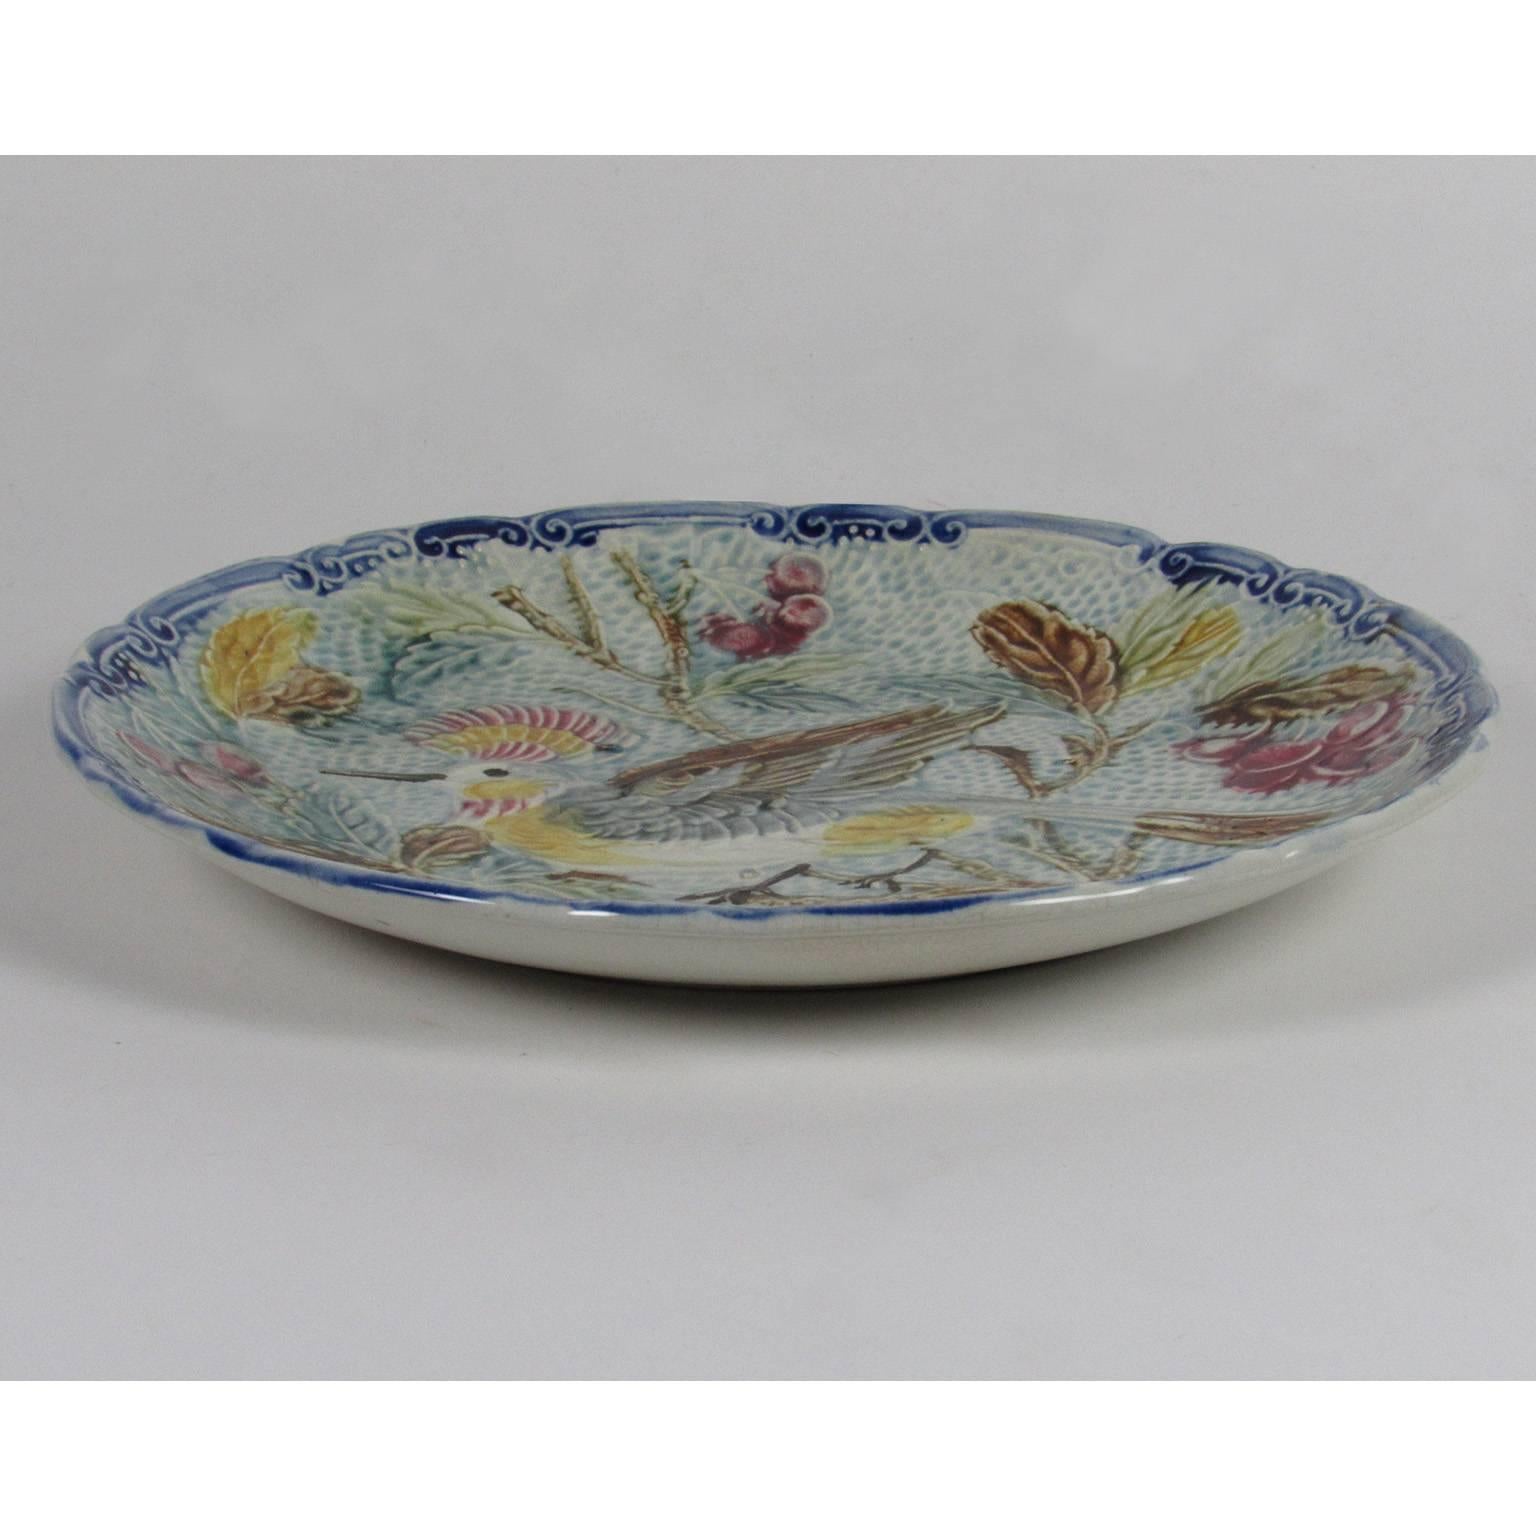 Scalloped edge Majolica Plate with an exotic bird on a branch, possibly of French or German origin. Diameter: 10 1/4 in., height: 1 1/4 in.